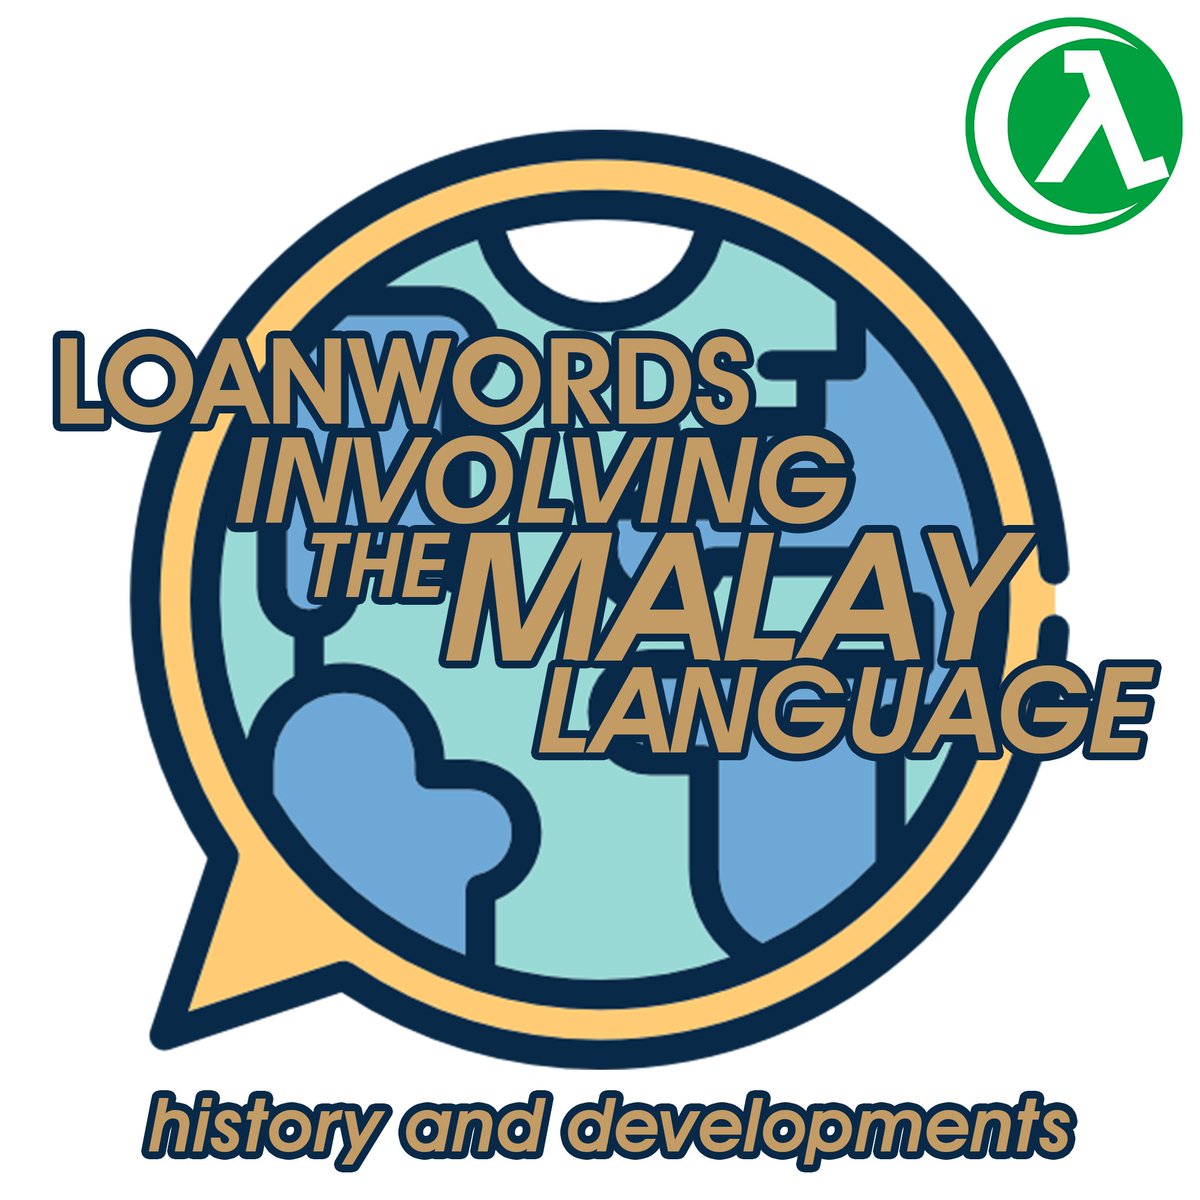 I always think of Malay as a unique language. It has developed over trade, religion and culture. Here's a post I've made about it. [Thread]